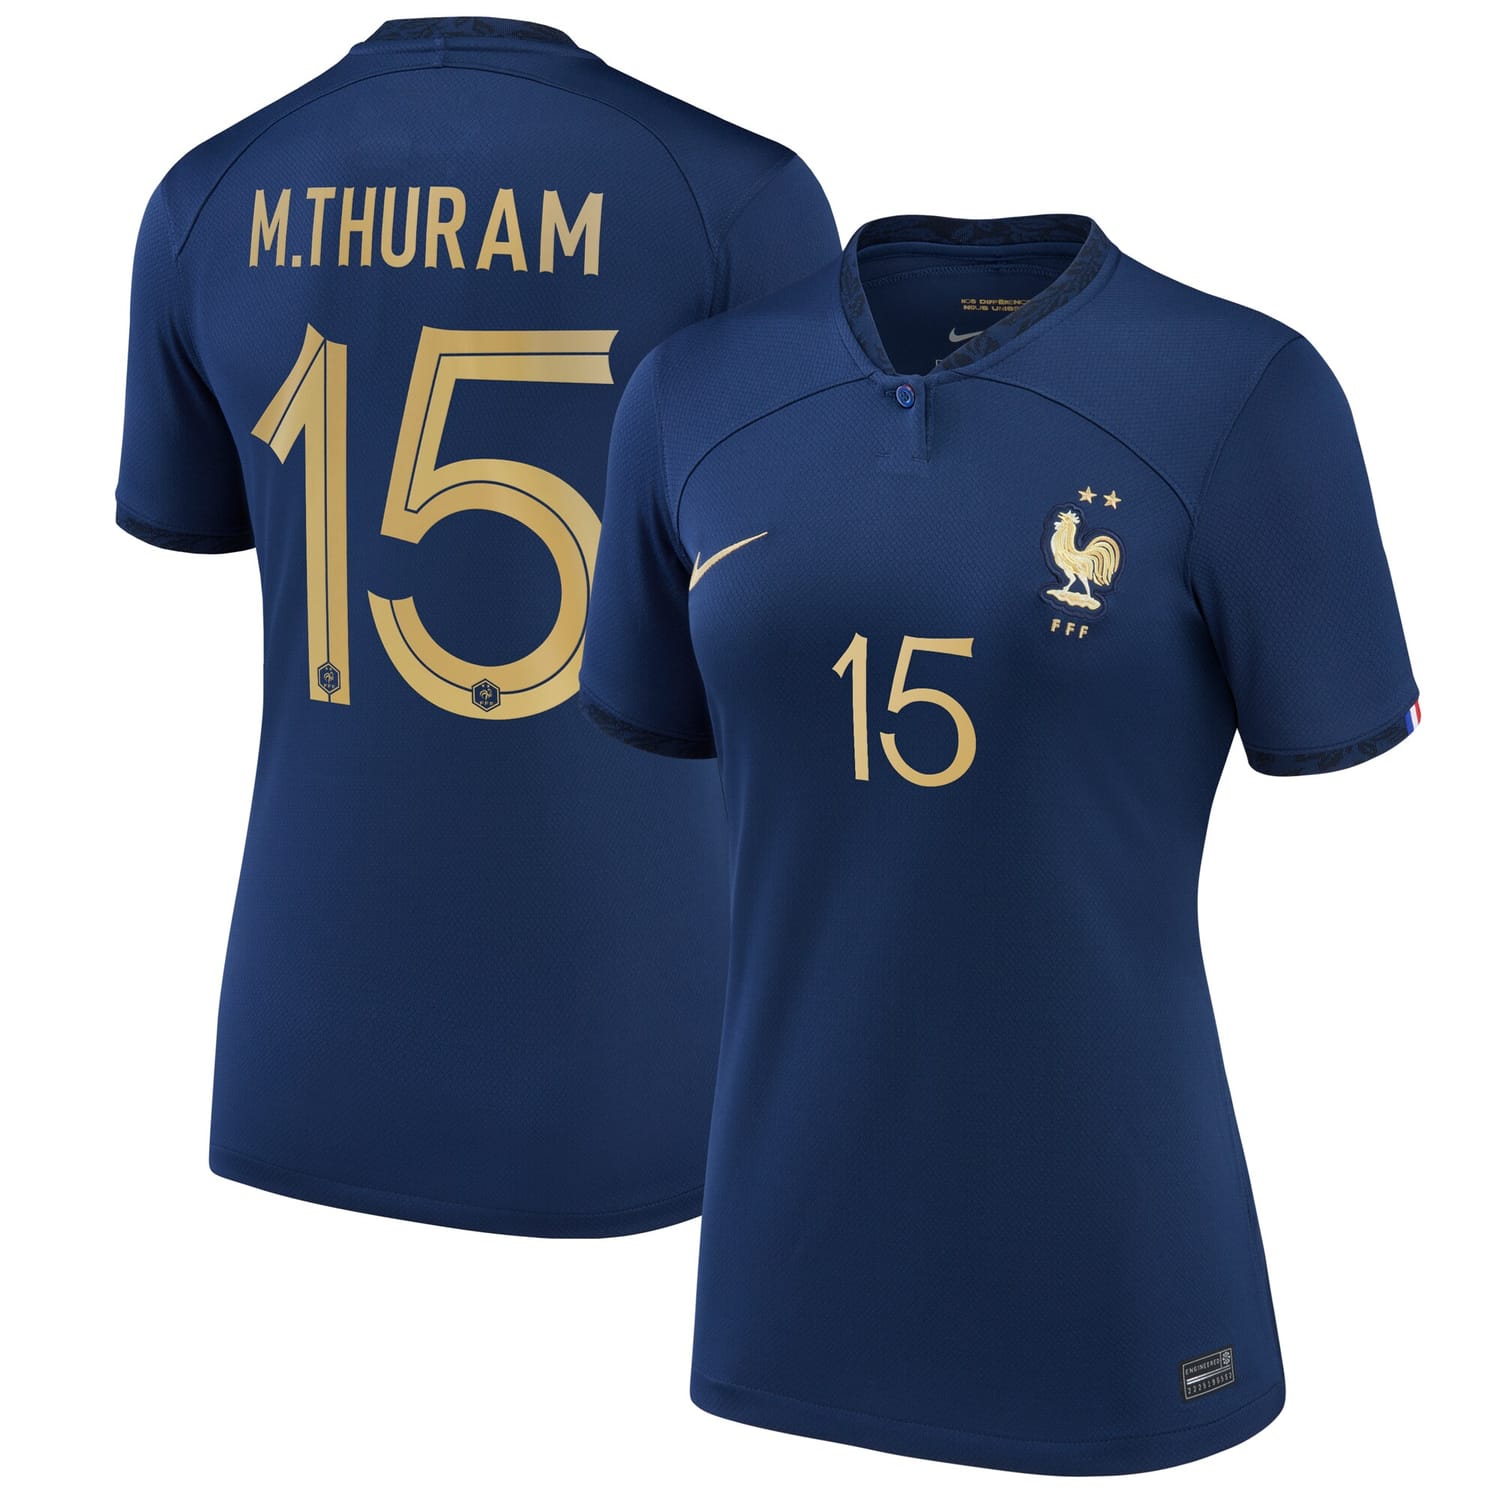 France National Team Home Jersey Shirt 2022 player Marcus Thuram printing for Women